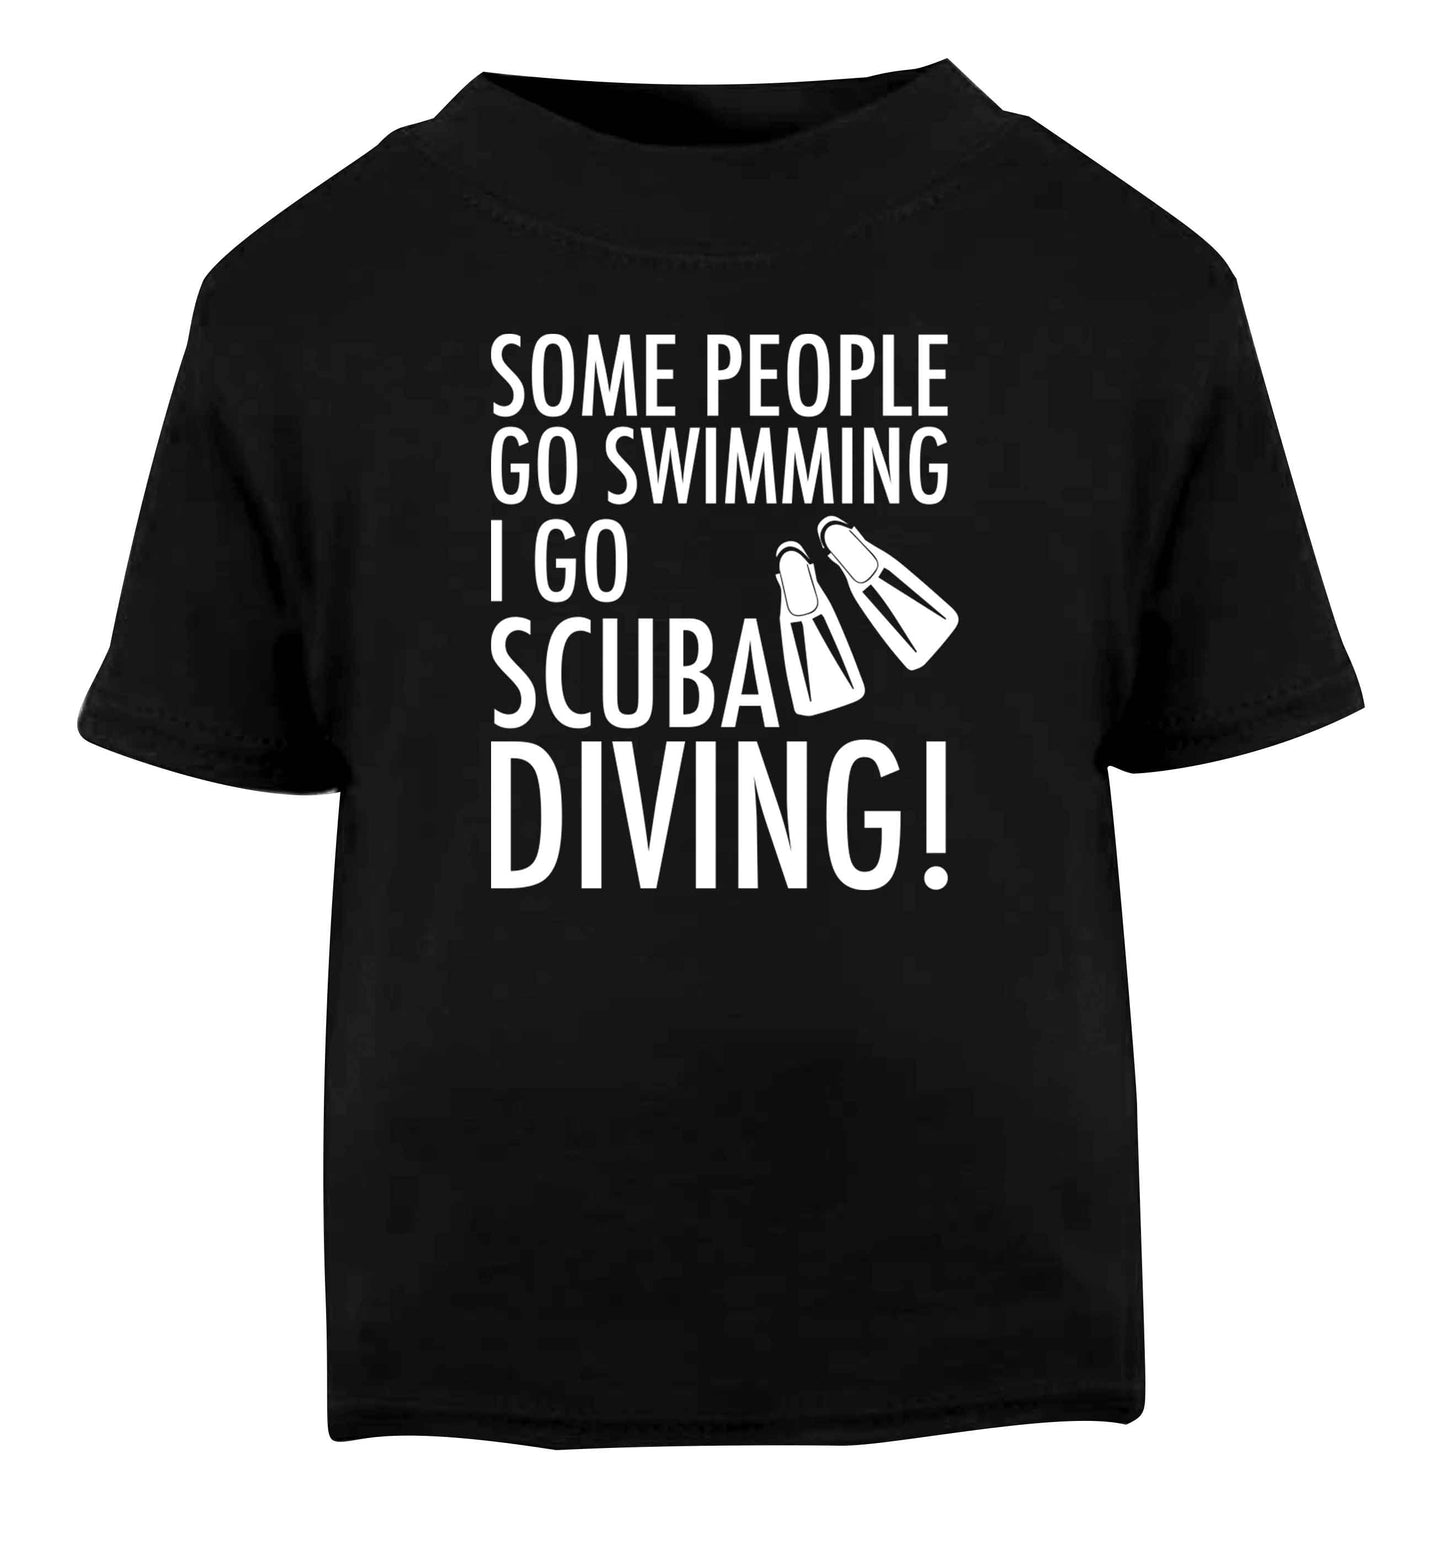 Some people go swimming I go scuba diving! Black Baby Toddler Tshirt 2 years